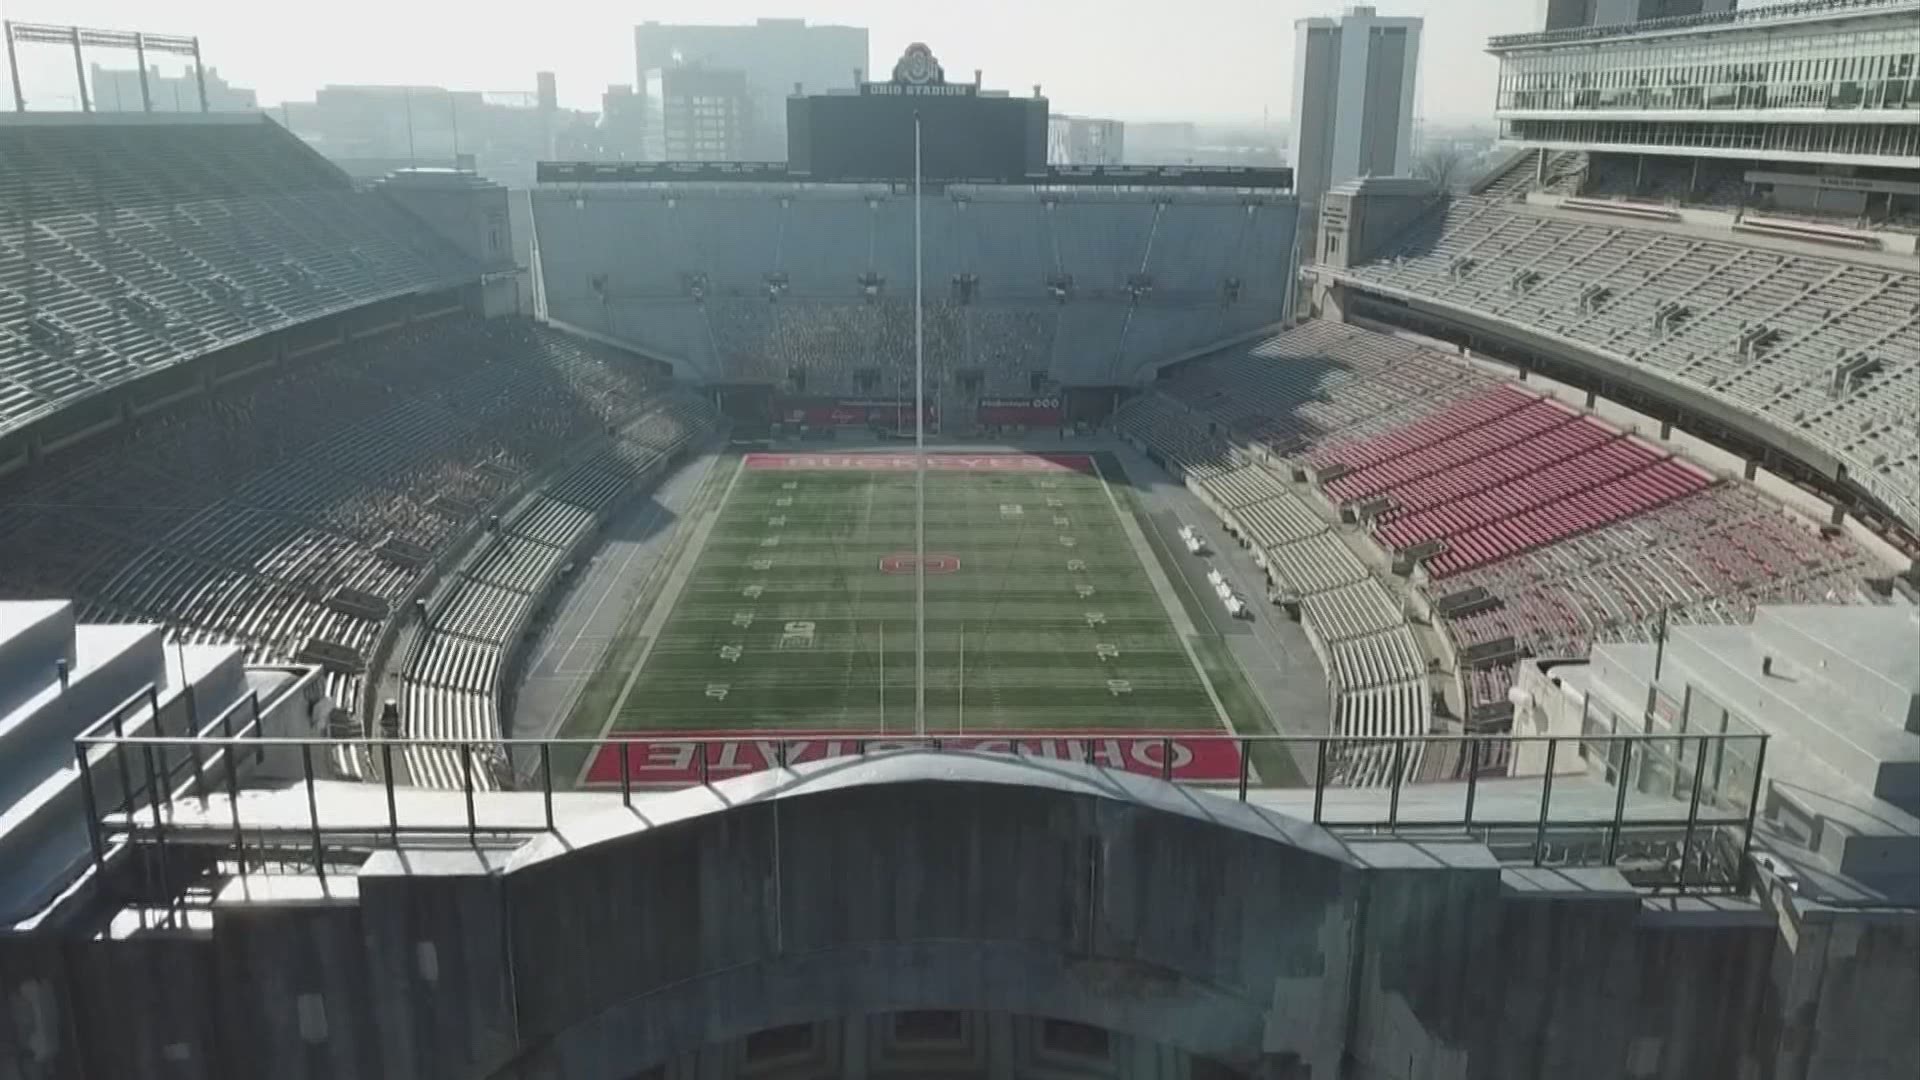 Fans will notice some changes as they enter Ohio Stadium for the first time in nearly two years in September.